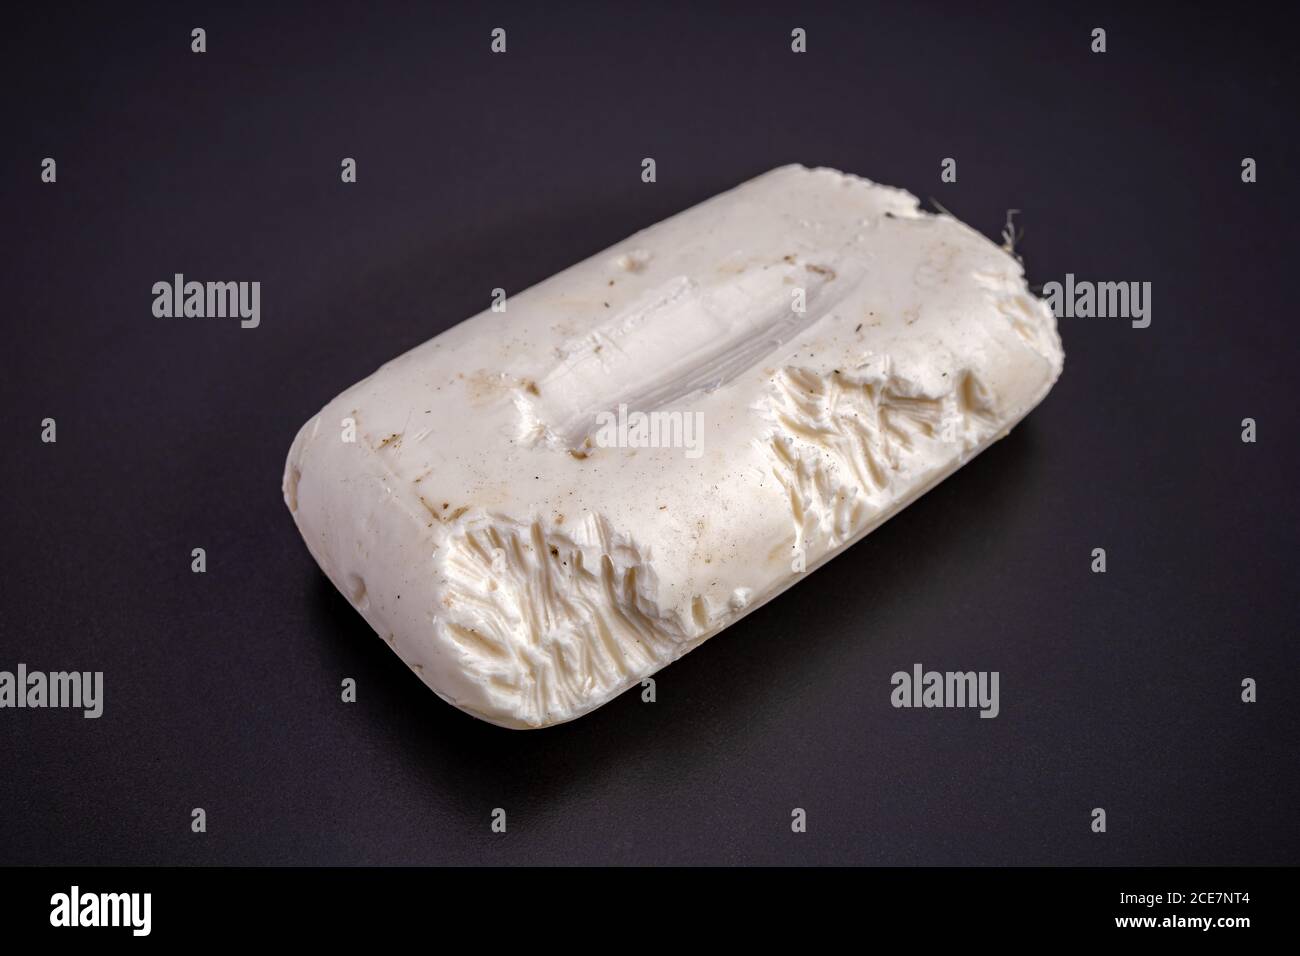 A lot of rodents, rodents and dirt are on this white soap that shouldn't be used.There may be disease on a black background. Stock Photo